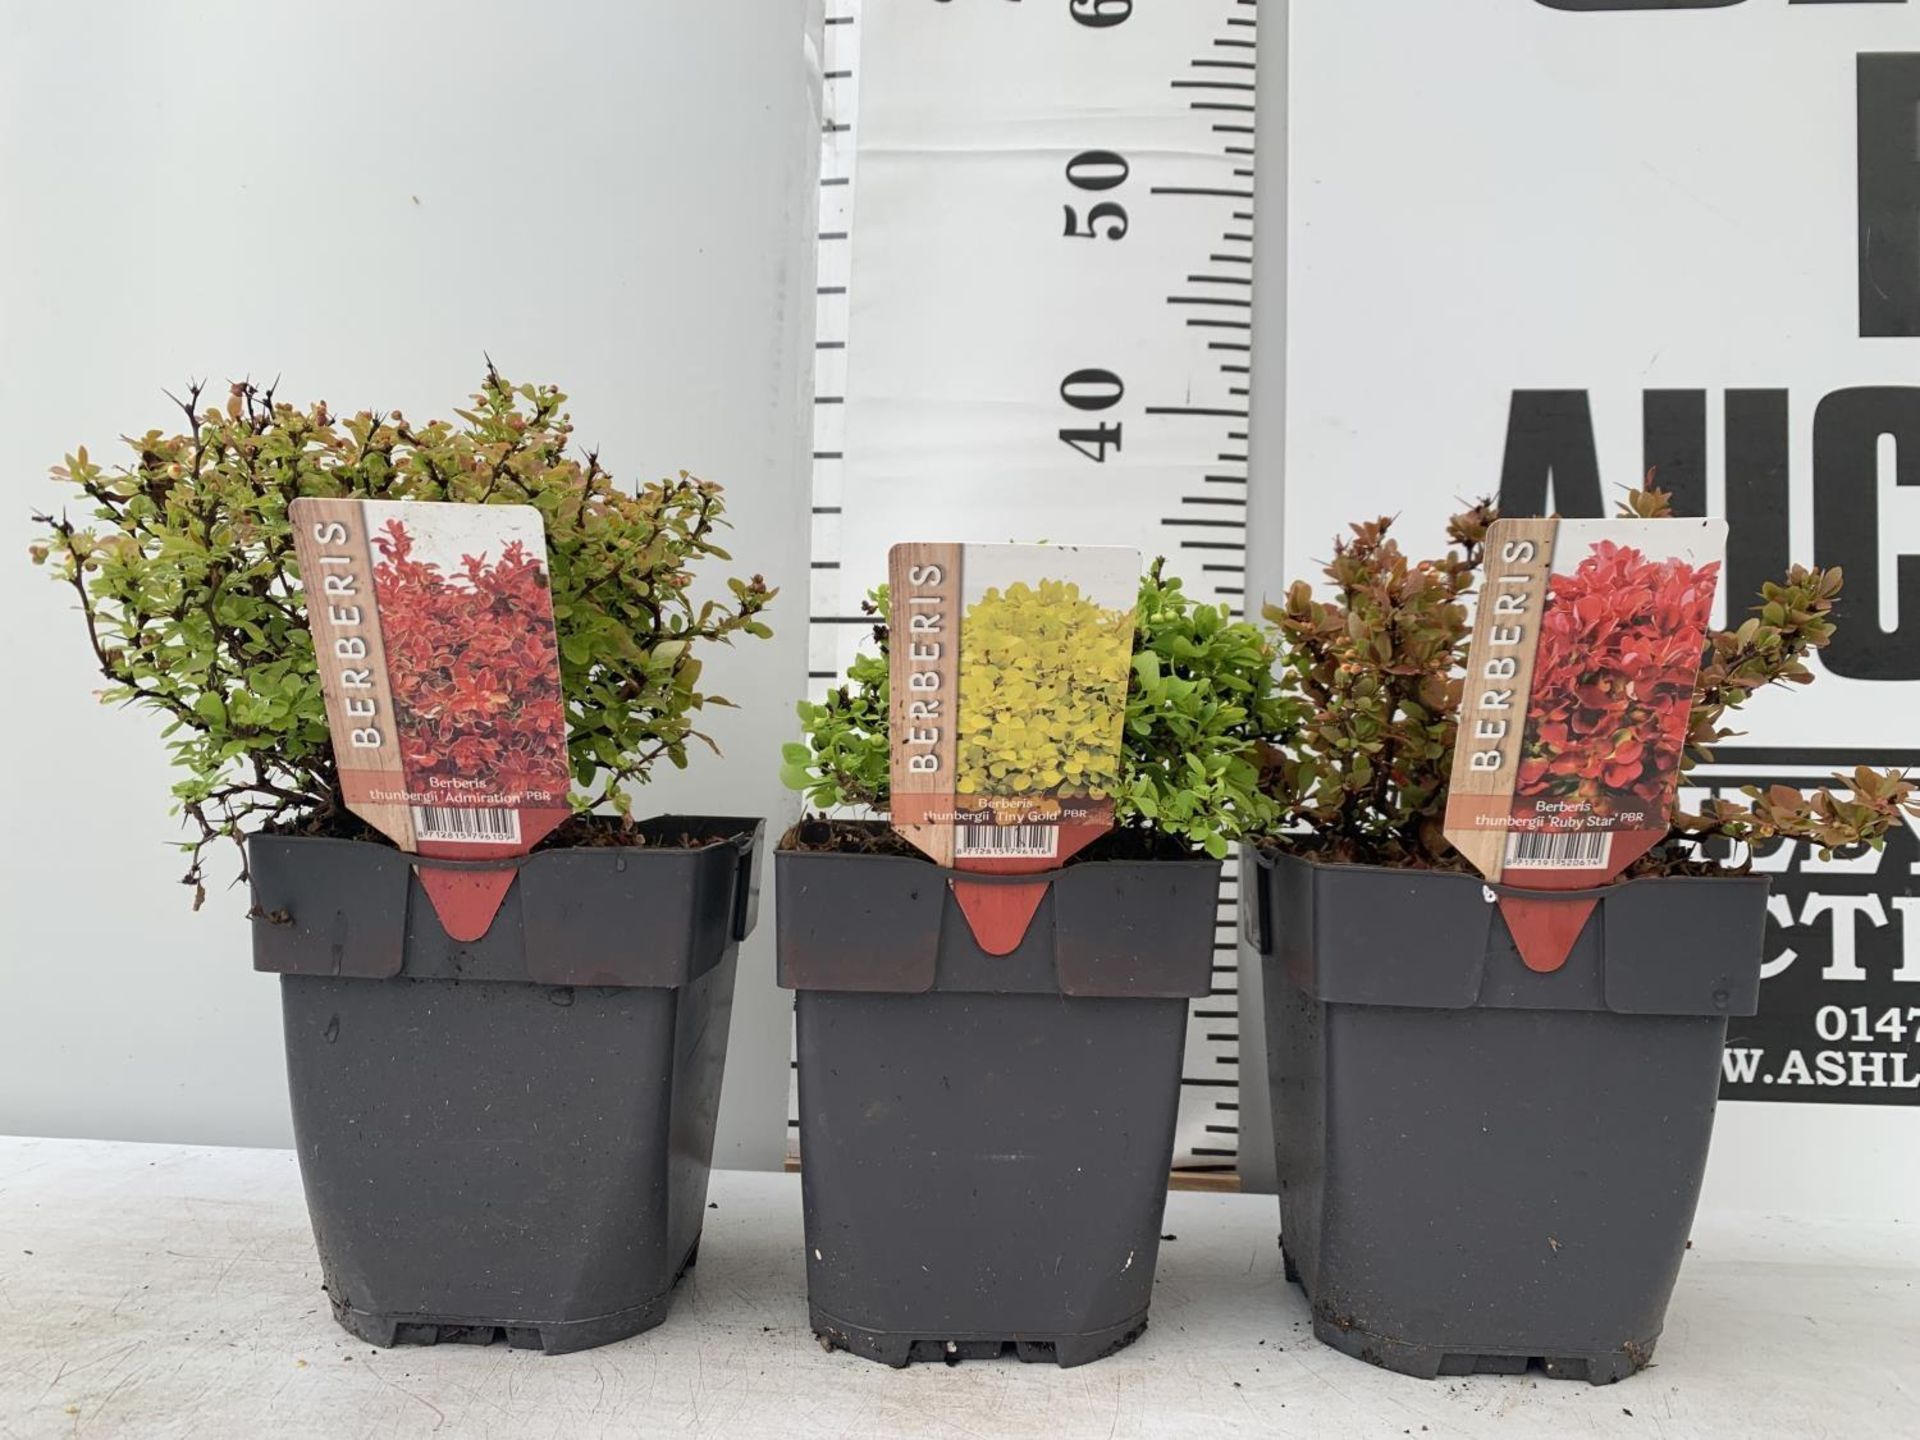 THREE ASSORTED BERBERIS THUNBERGII 'RUBY STAR' 'TINY GOLD' AND 'ADMIRATION' IN 2 LTR POTS PLUS VAT - Image 2 of 12